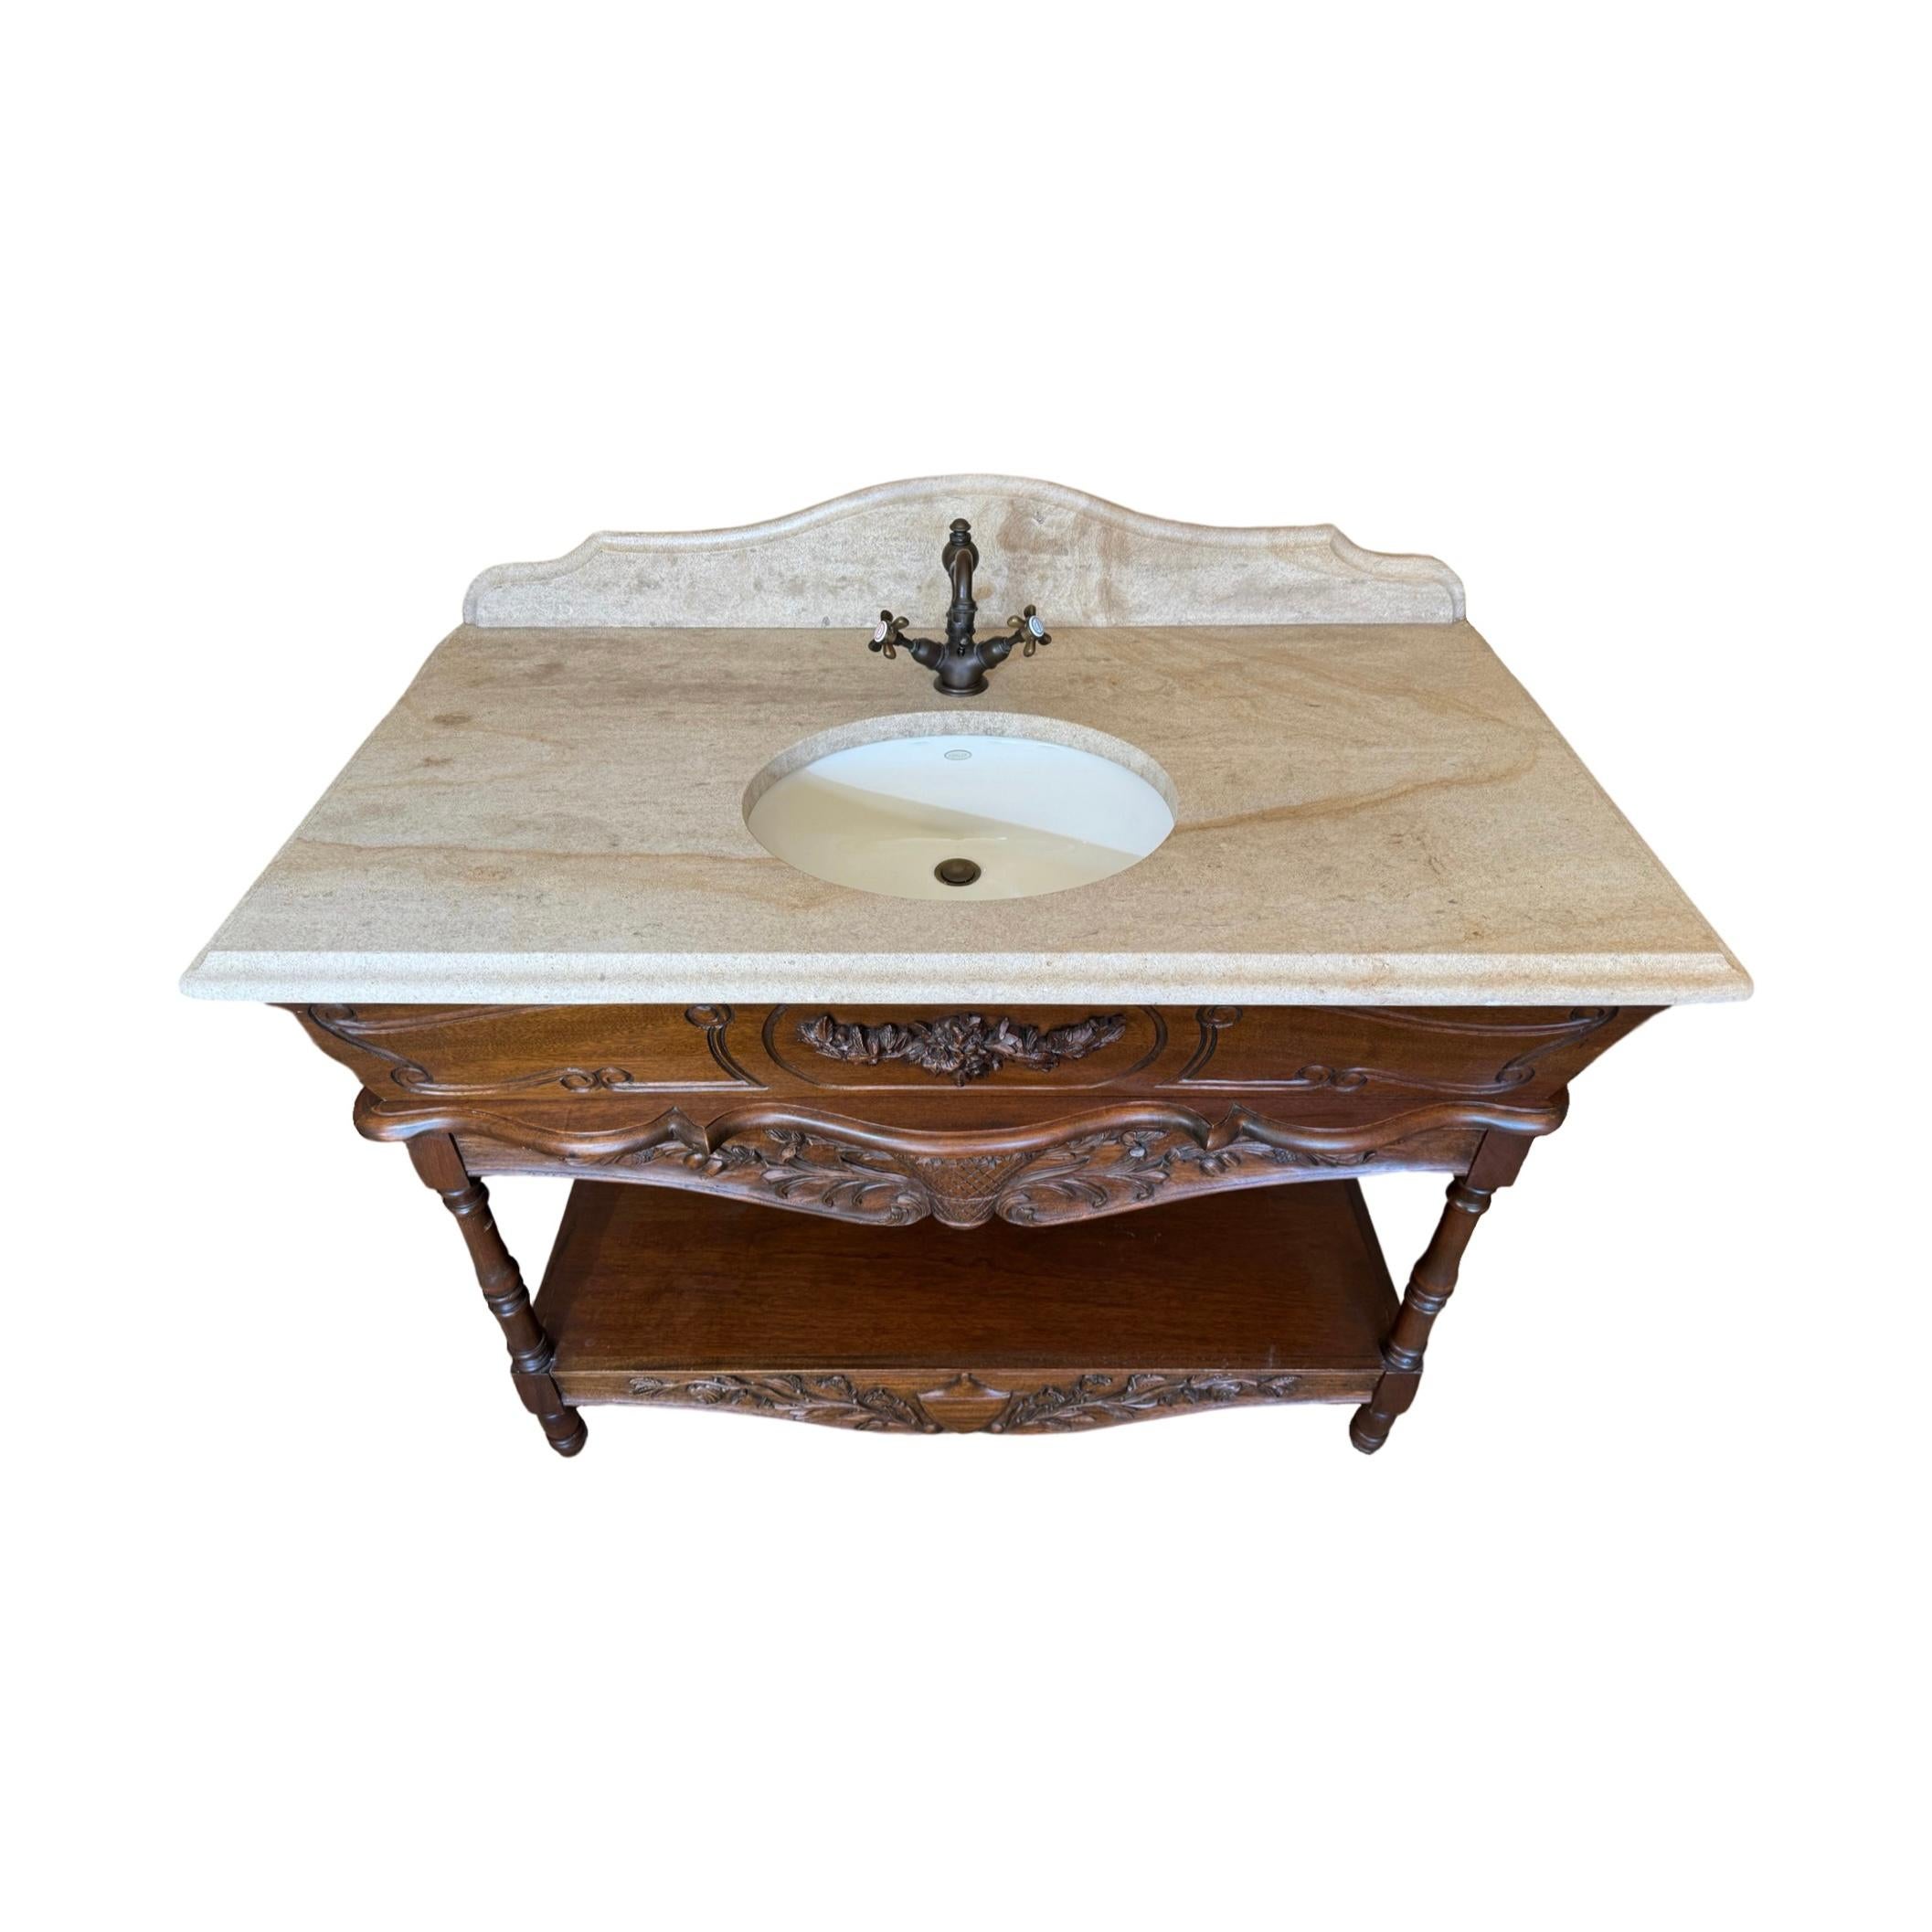 18th Century French Walnut Wood and Travertine Stone Sink For Sale